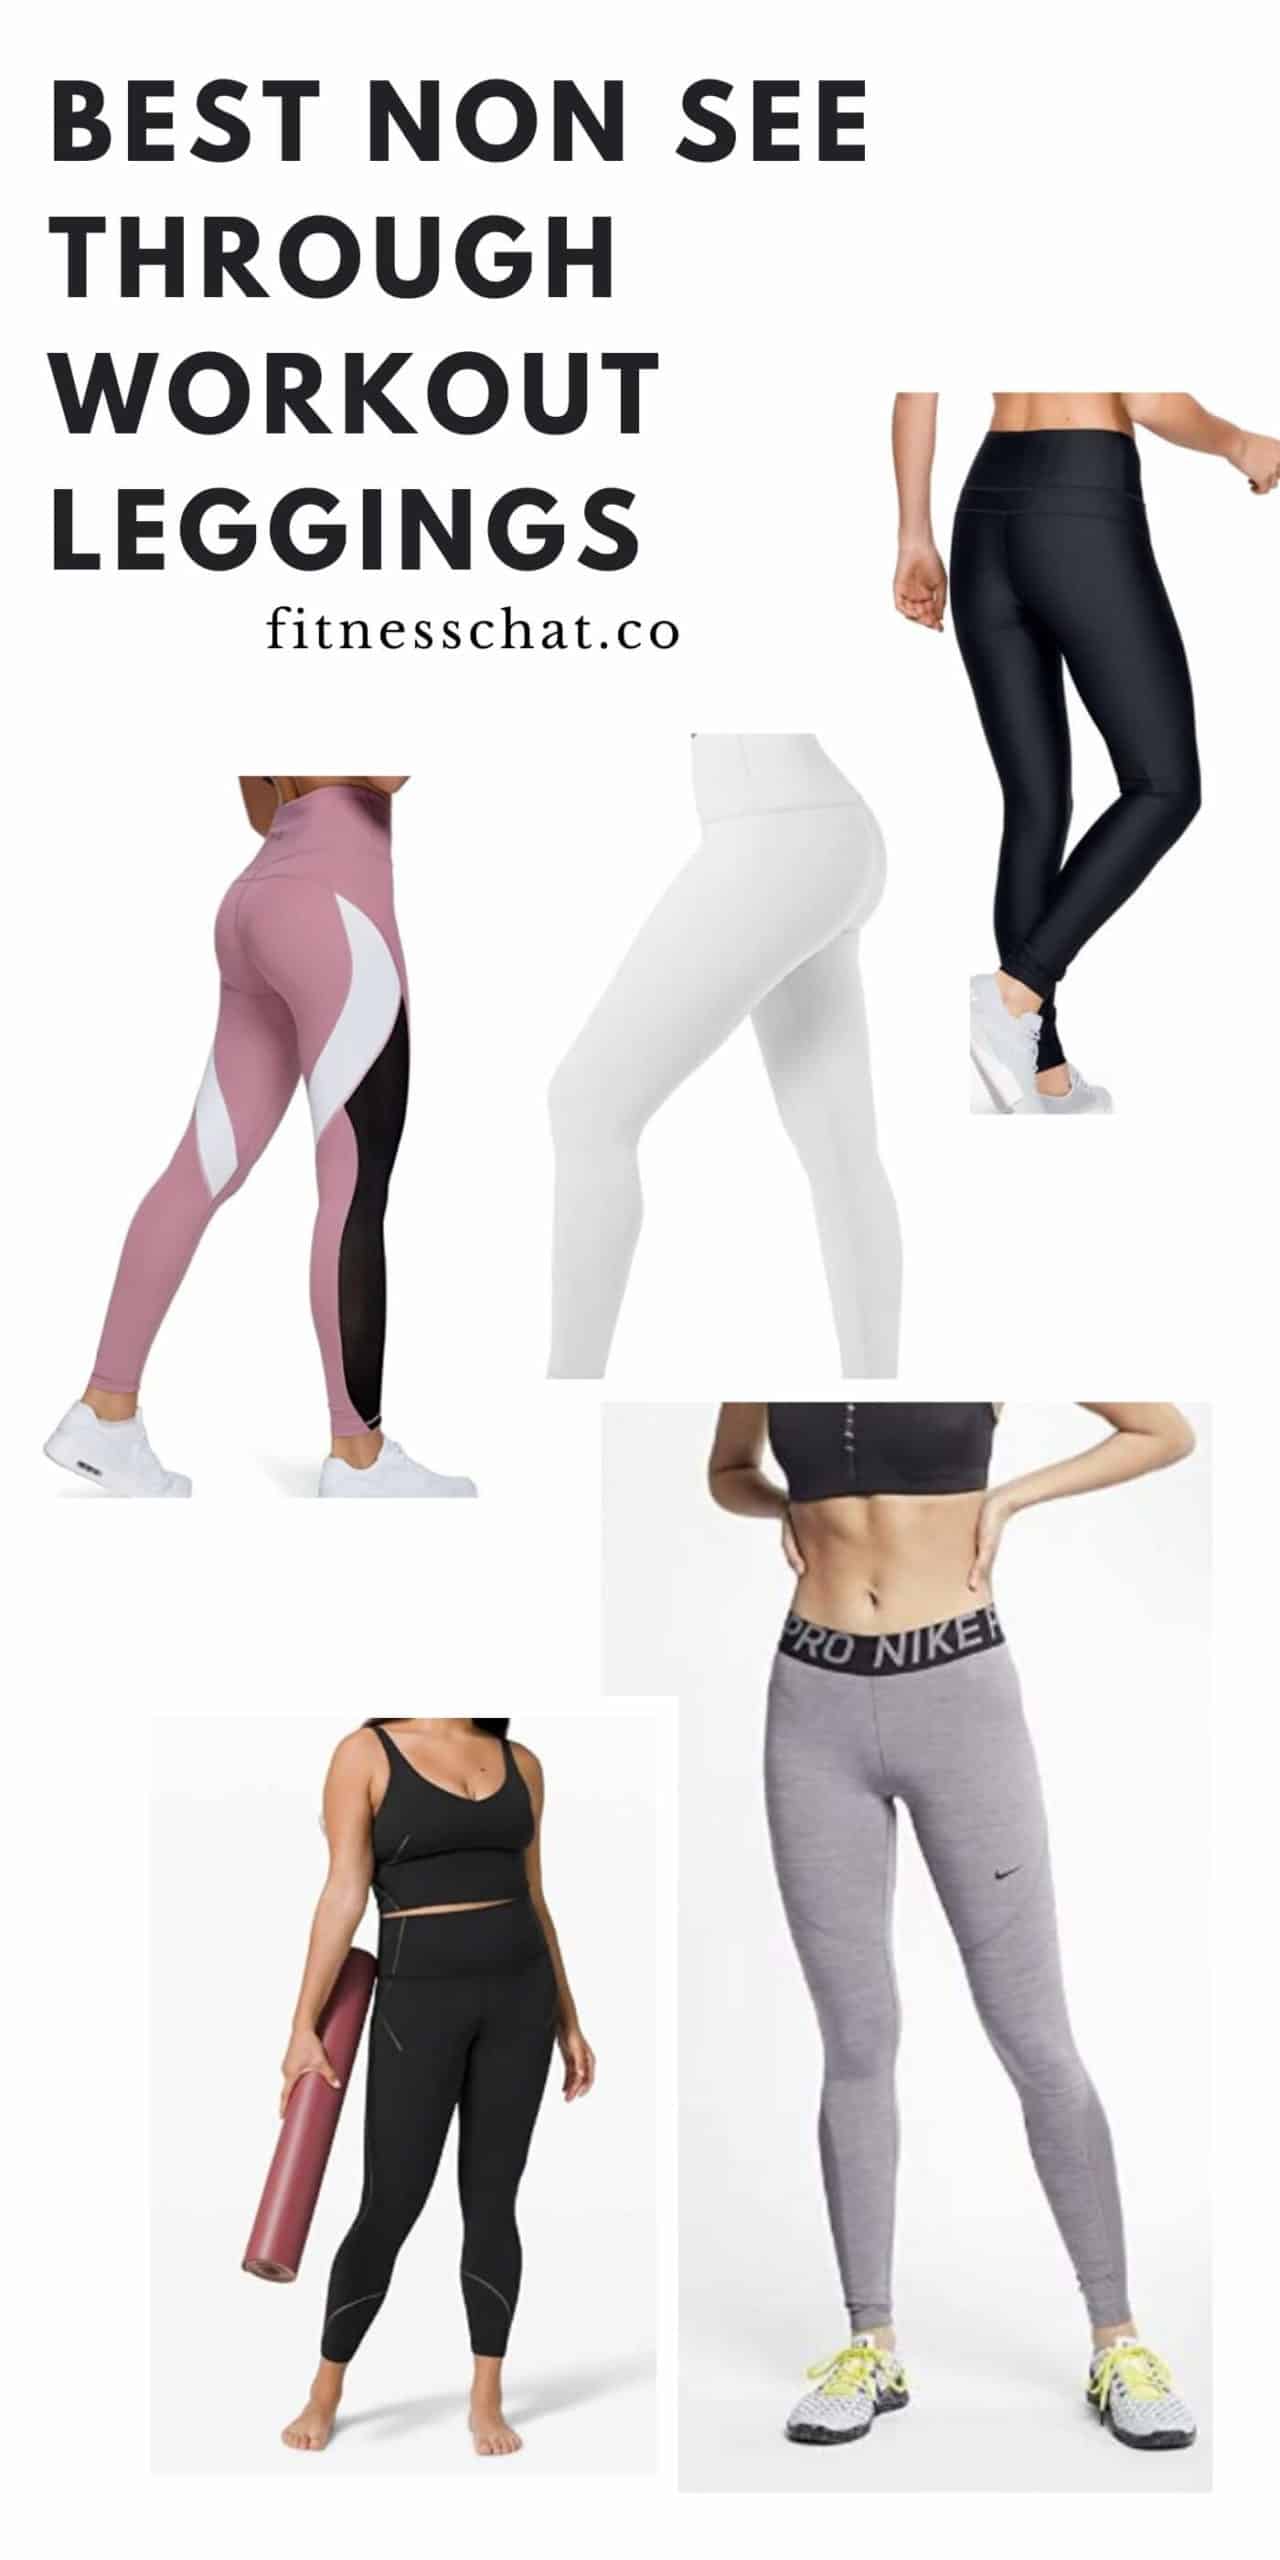 https://www.fitnesschat.co/wp-content/uploads/2021/02/best-non-see-through-workout-leggings-amazon-1-scaled.jpg